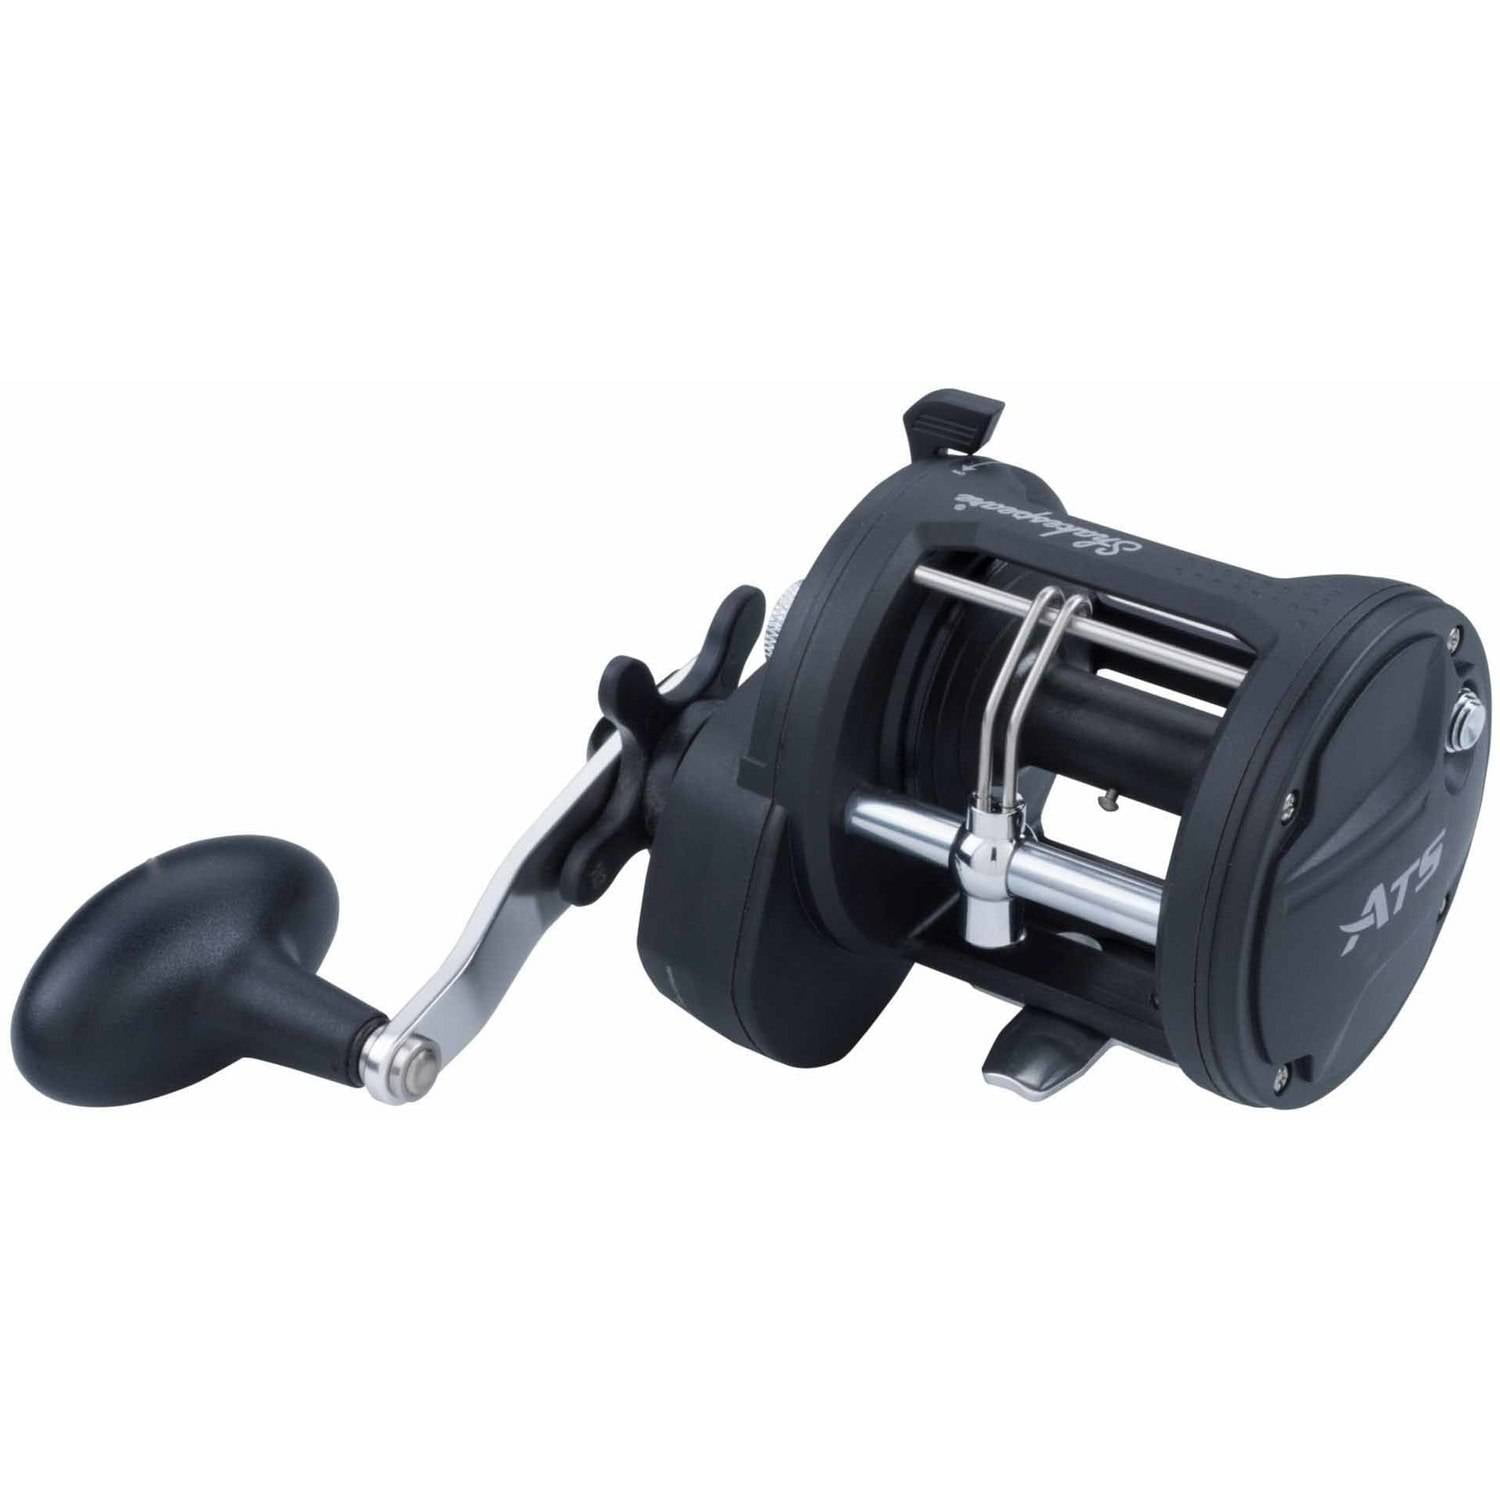 Shakespeare ATS Linecounter Trolling Reel 2BB ATS30LCX 1366926 2-Pack 